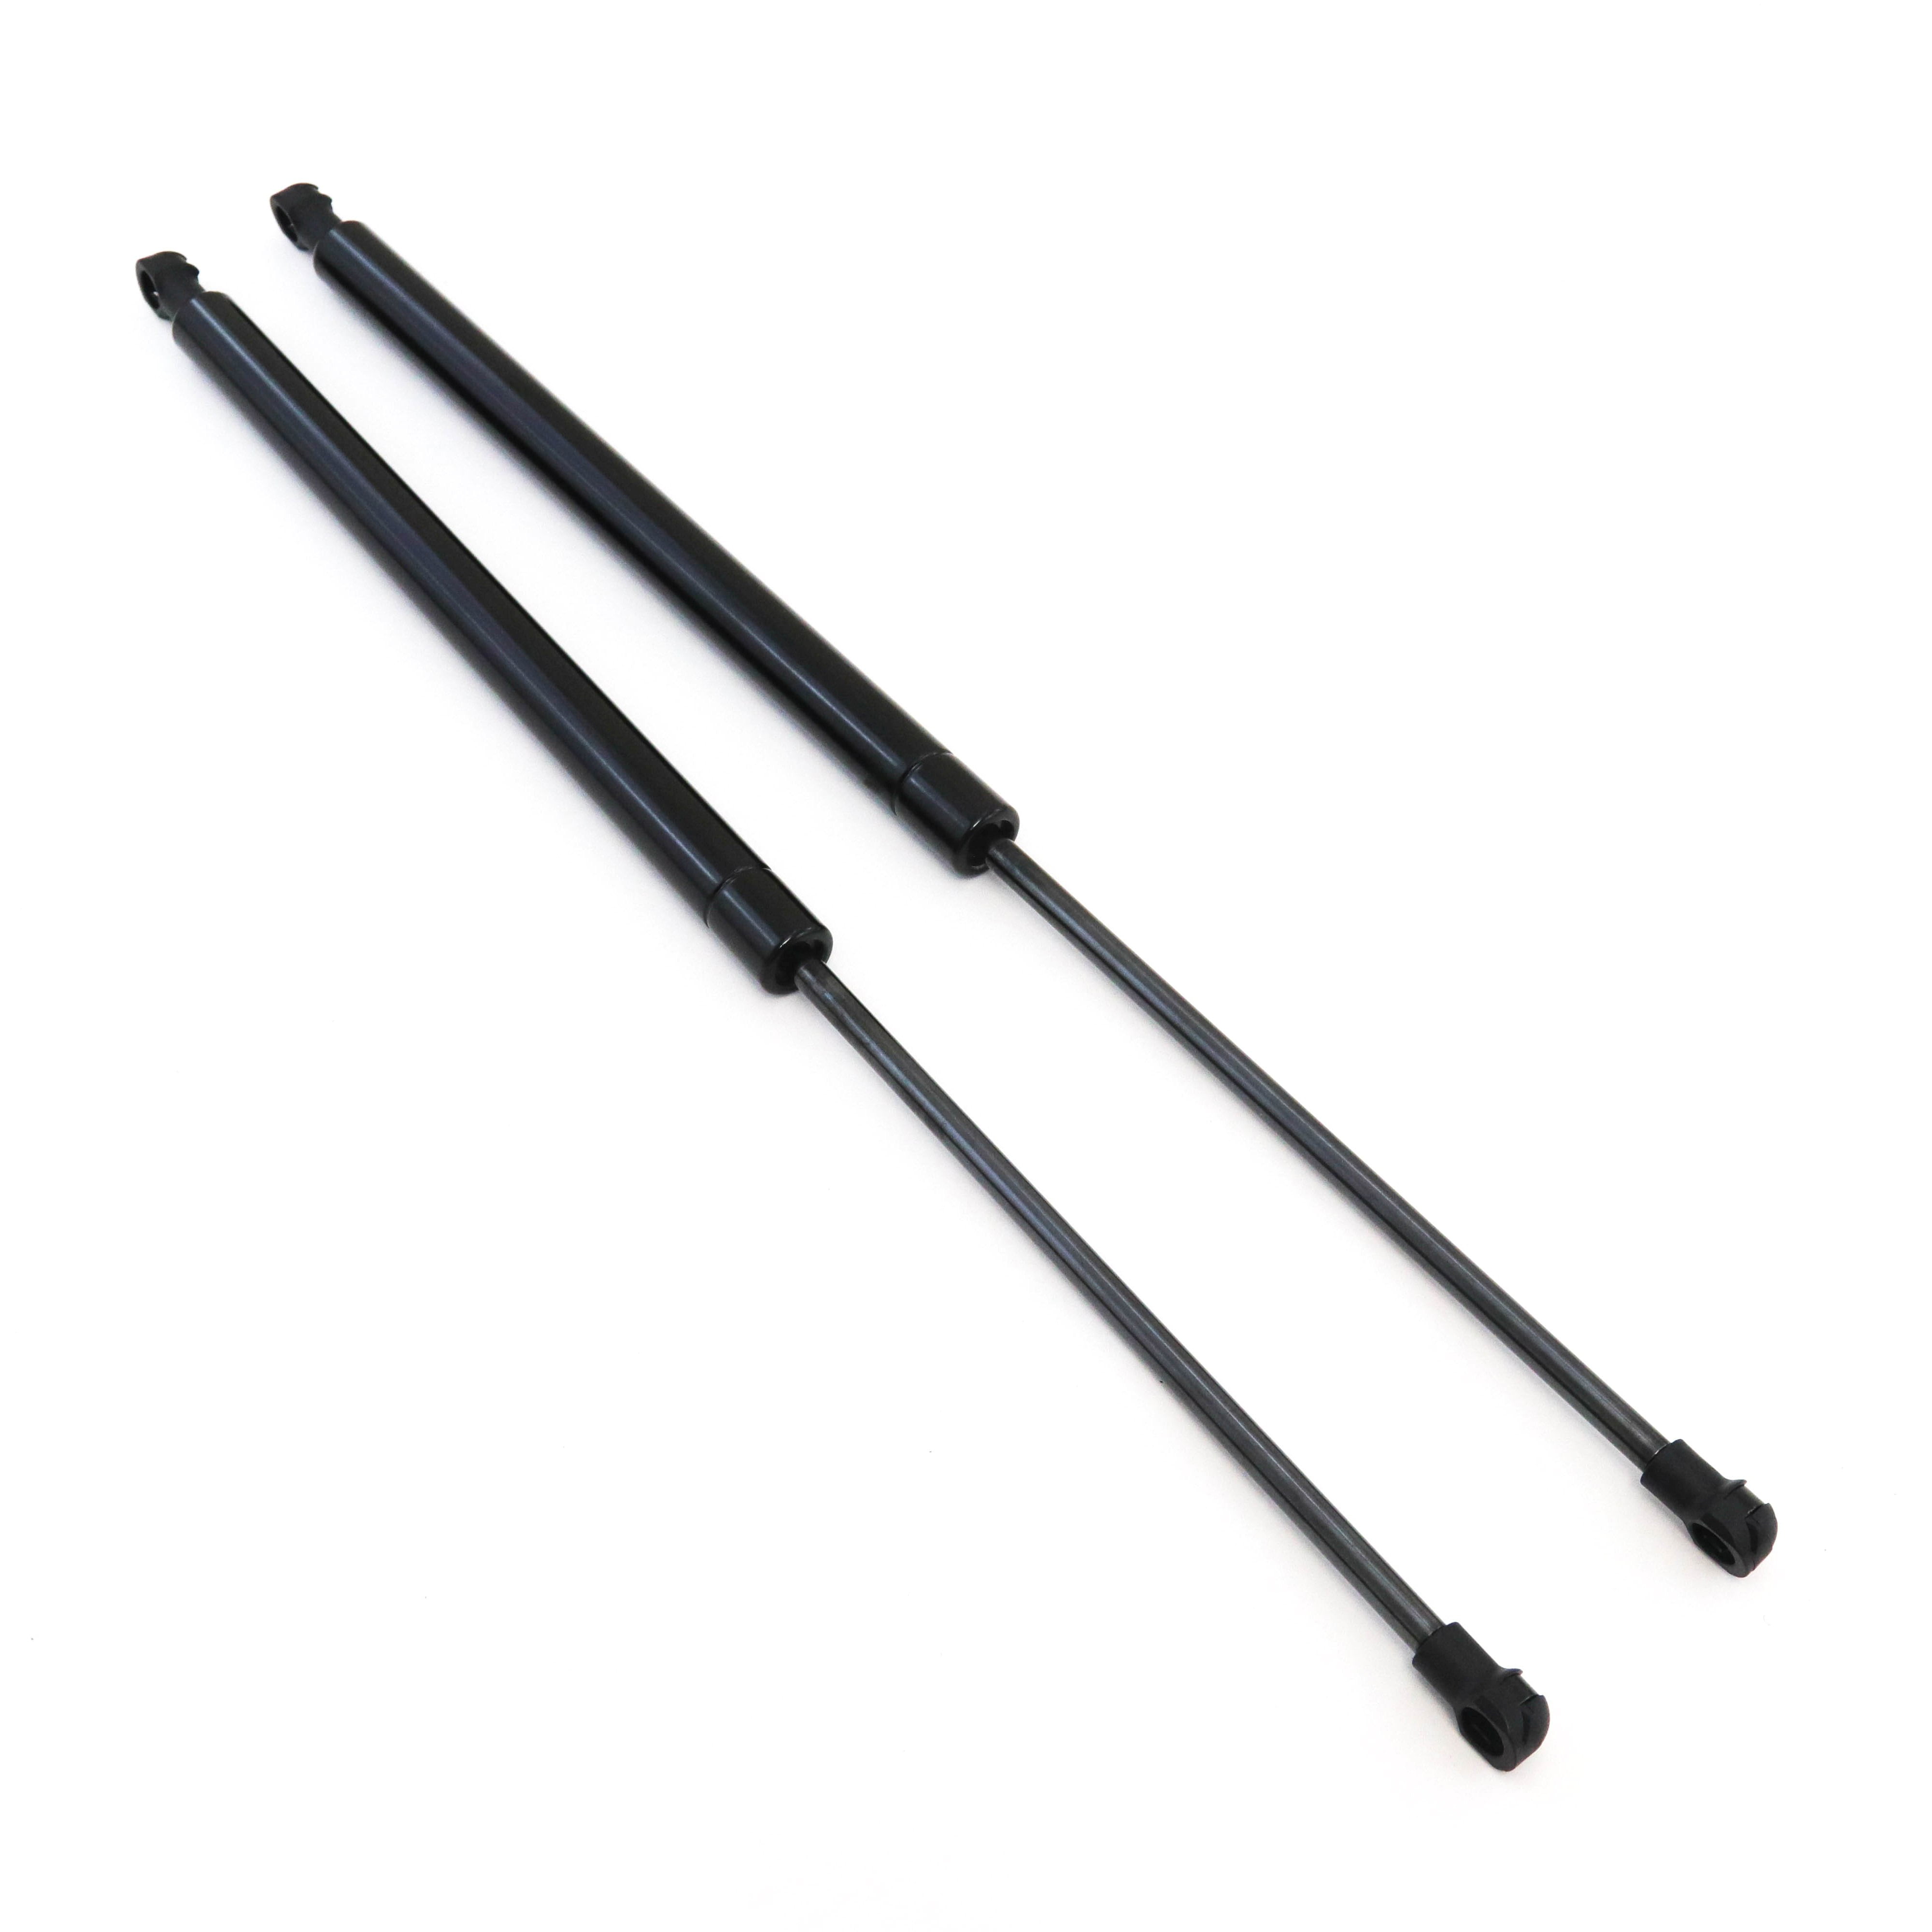 A-Premium 26.34 inch 100lb Lift Supports Gas Spring Shock Struts Replacement for Toolbox Cabinets Sliding Window Storage Bed Bench Lids Basement Door 2-PC Set